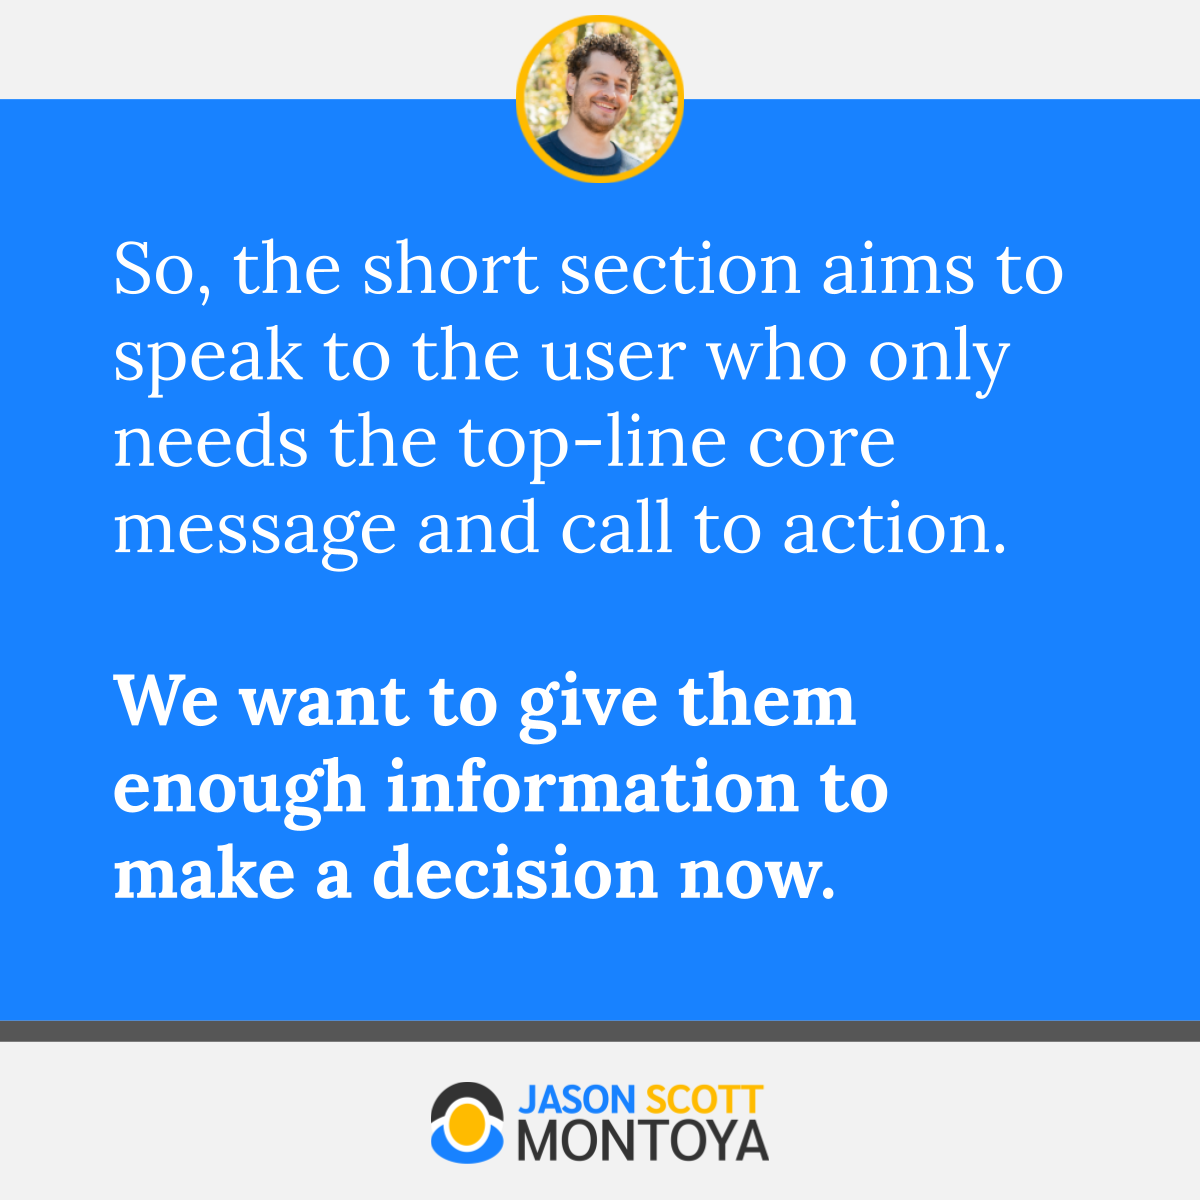 So, the short section aims to speak to the user who only needs the top-line core message and call to action.   We want to give them enough information to make a decision now. 